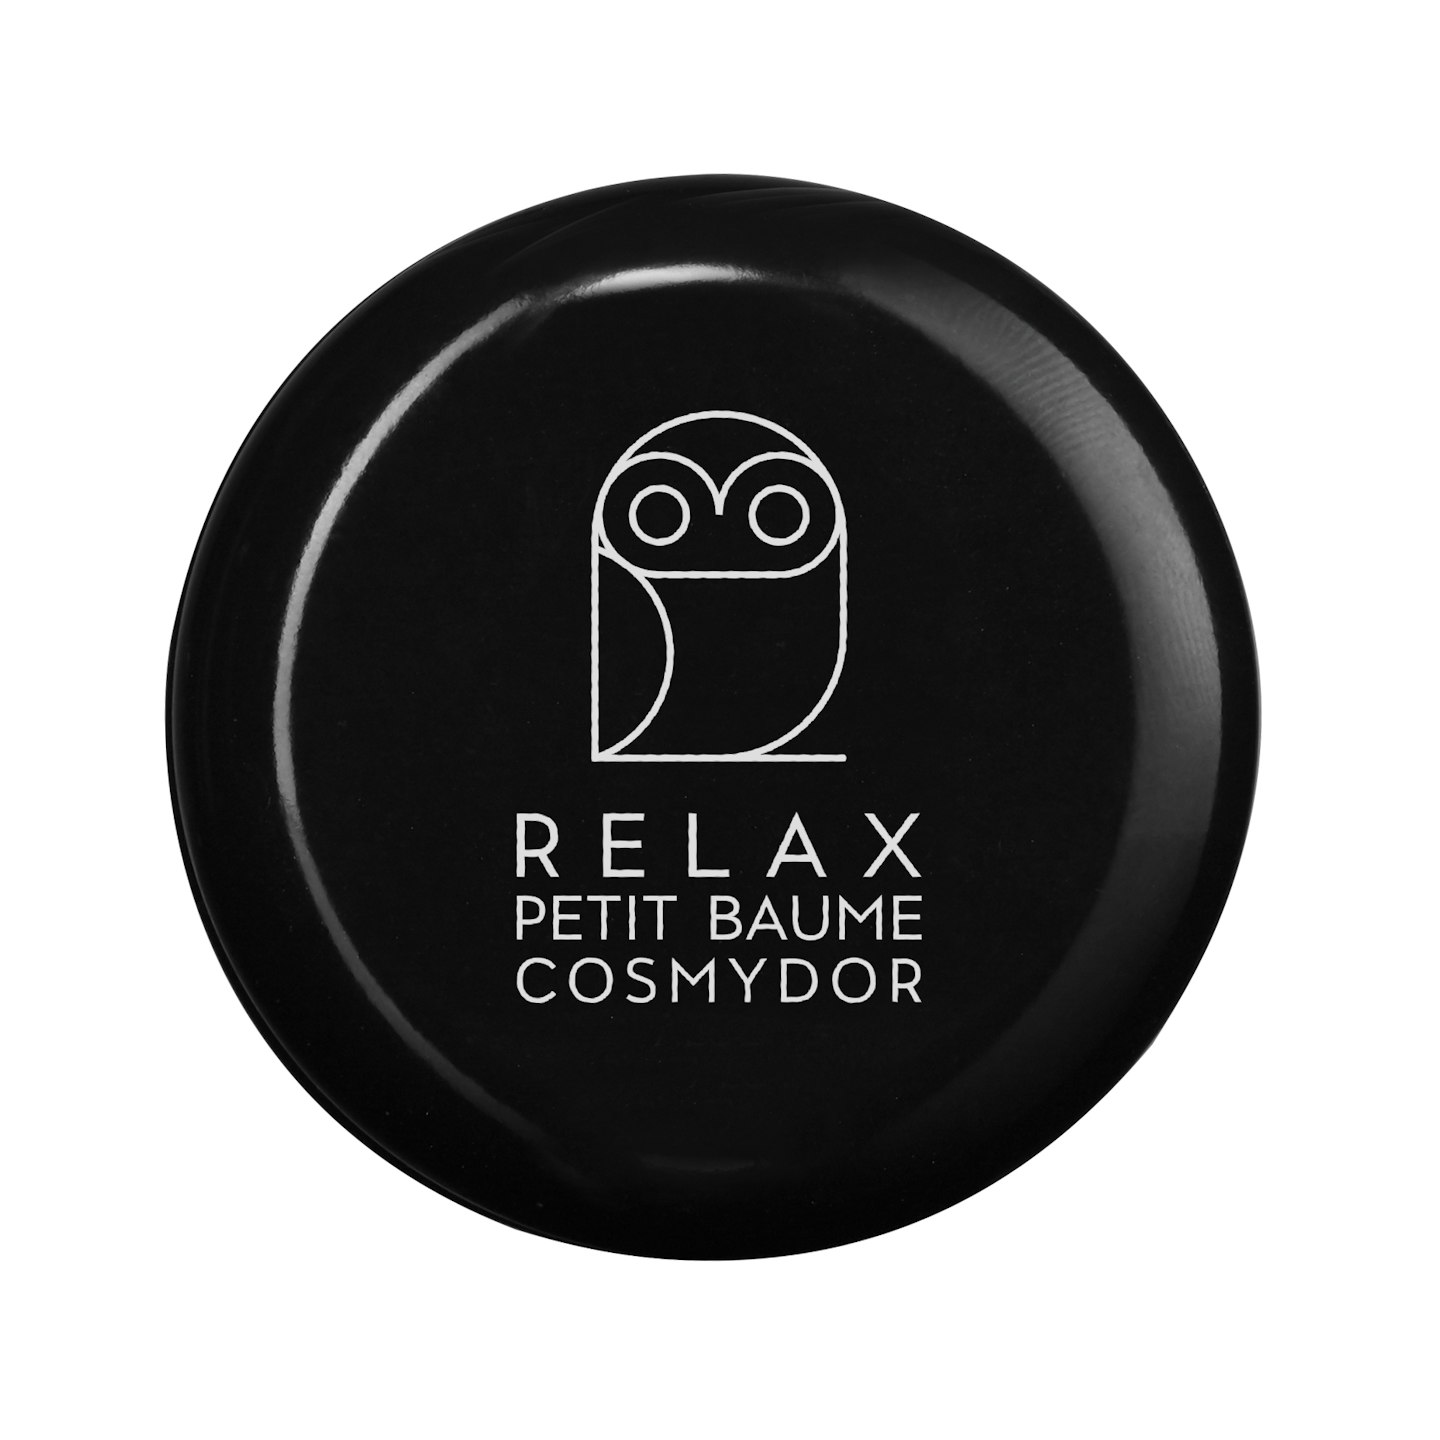 Cosmydor, Petit Baume Relax, £27